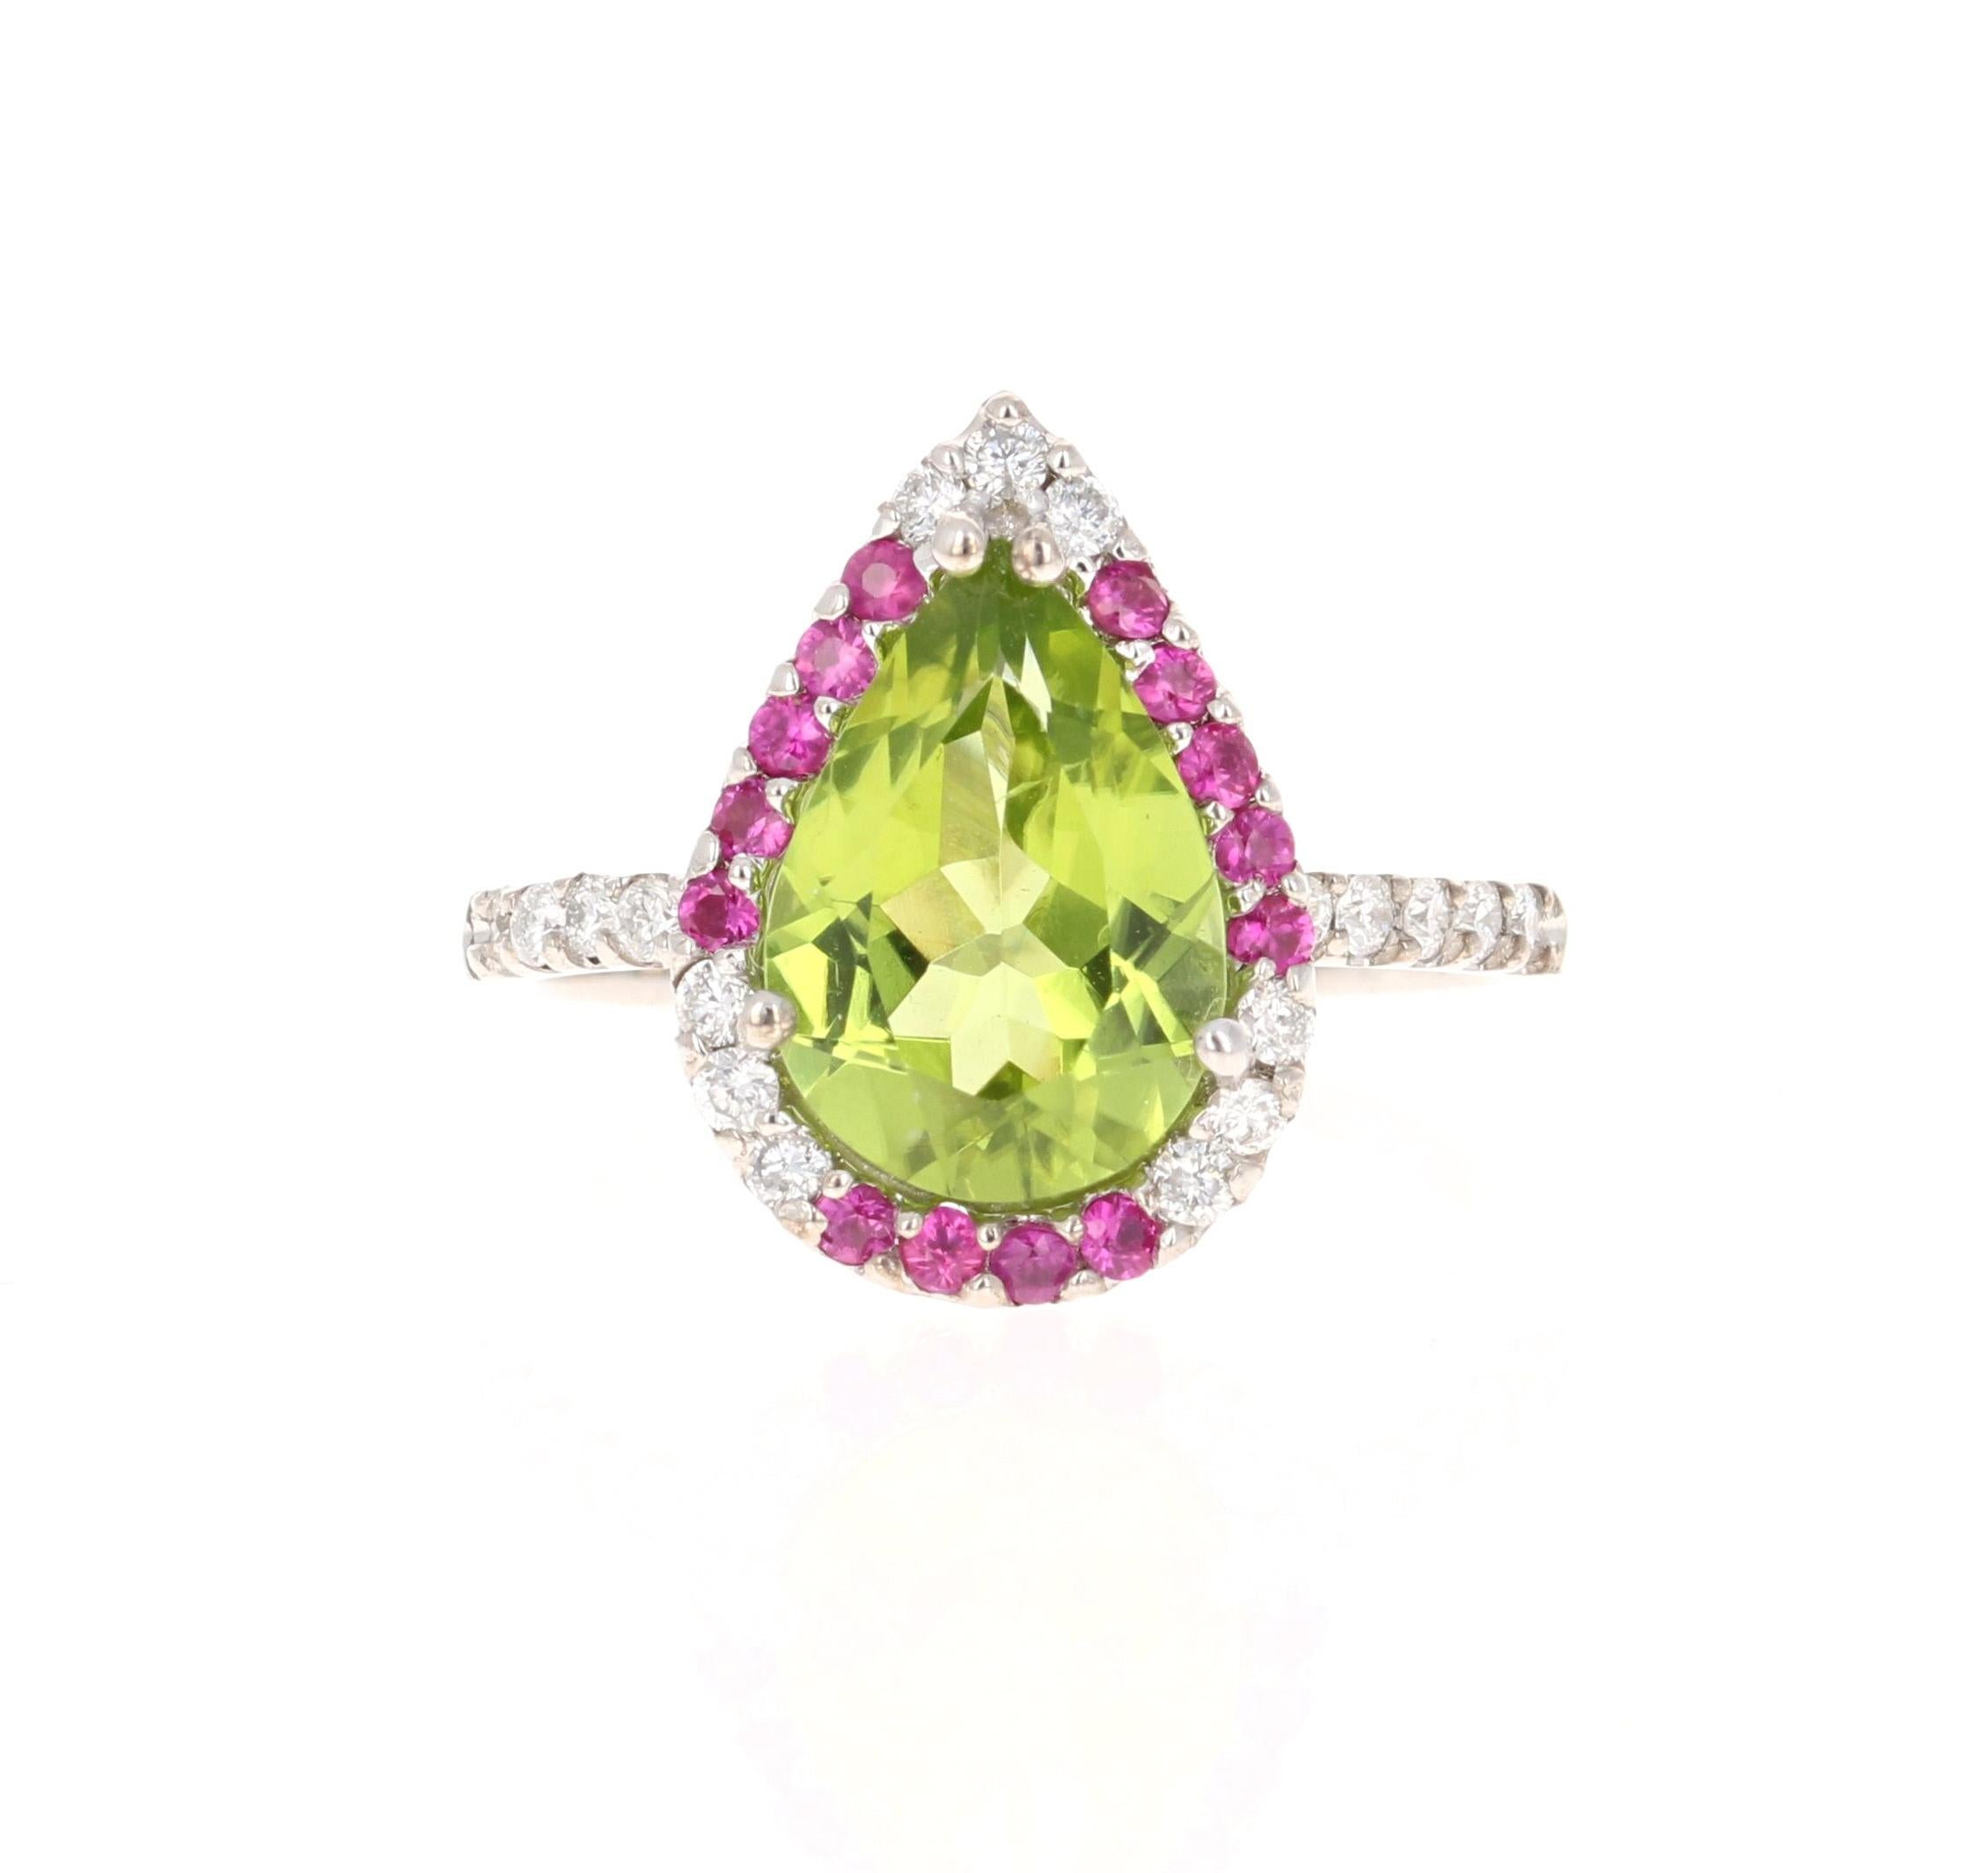 This beautiful ring has a Pear Cut Peridot in the center that weighs 2.77 carats. The ring is surrounded by a cute halo of alternating diamonds and pink sapphires. There are 21 Round Cut Natural Diamonds that weigh 0.31 carats and 14 Pink Sapphires